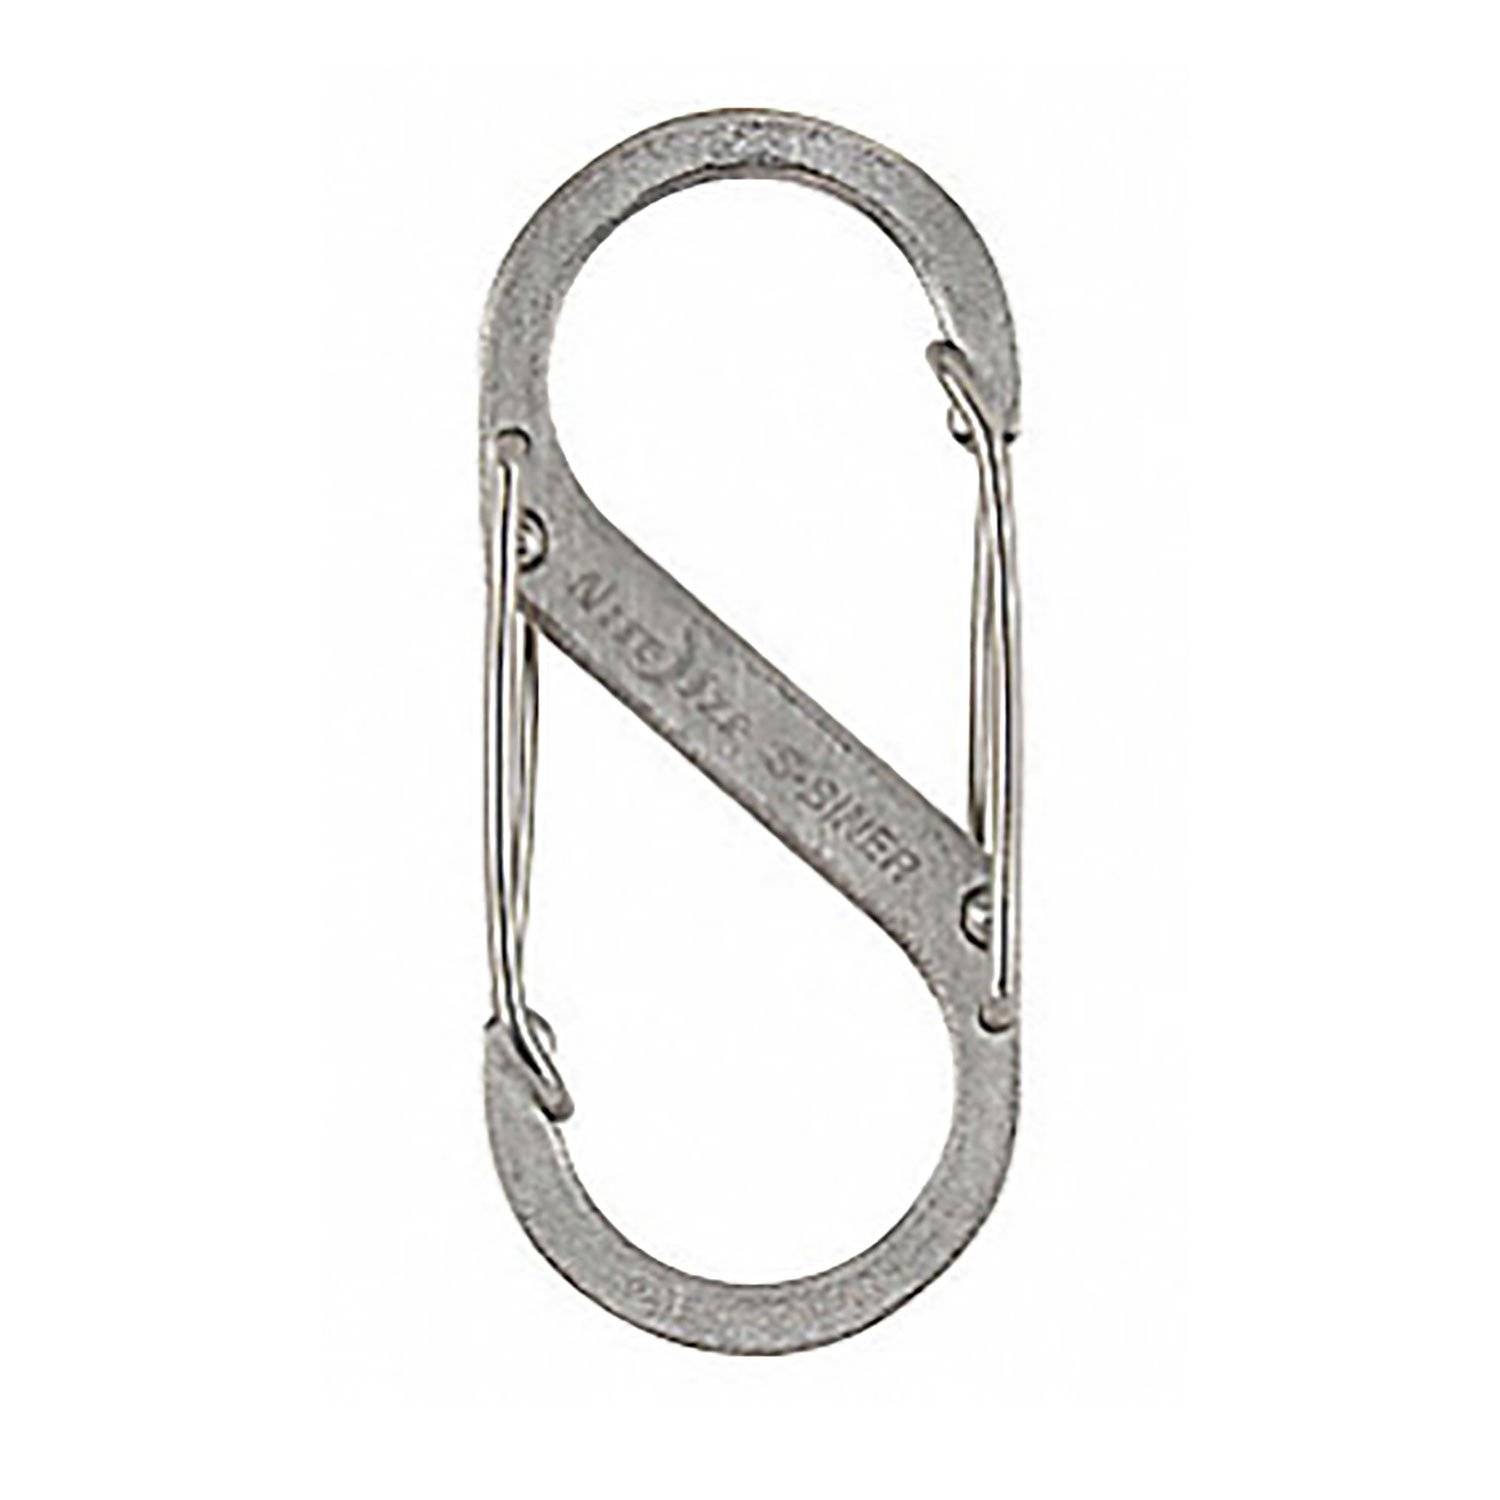 Nite Ize Double Gated Carabiner